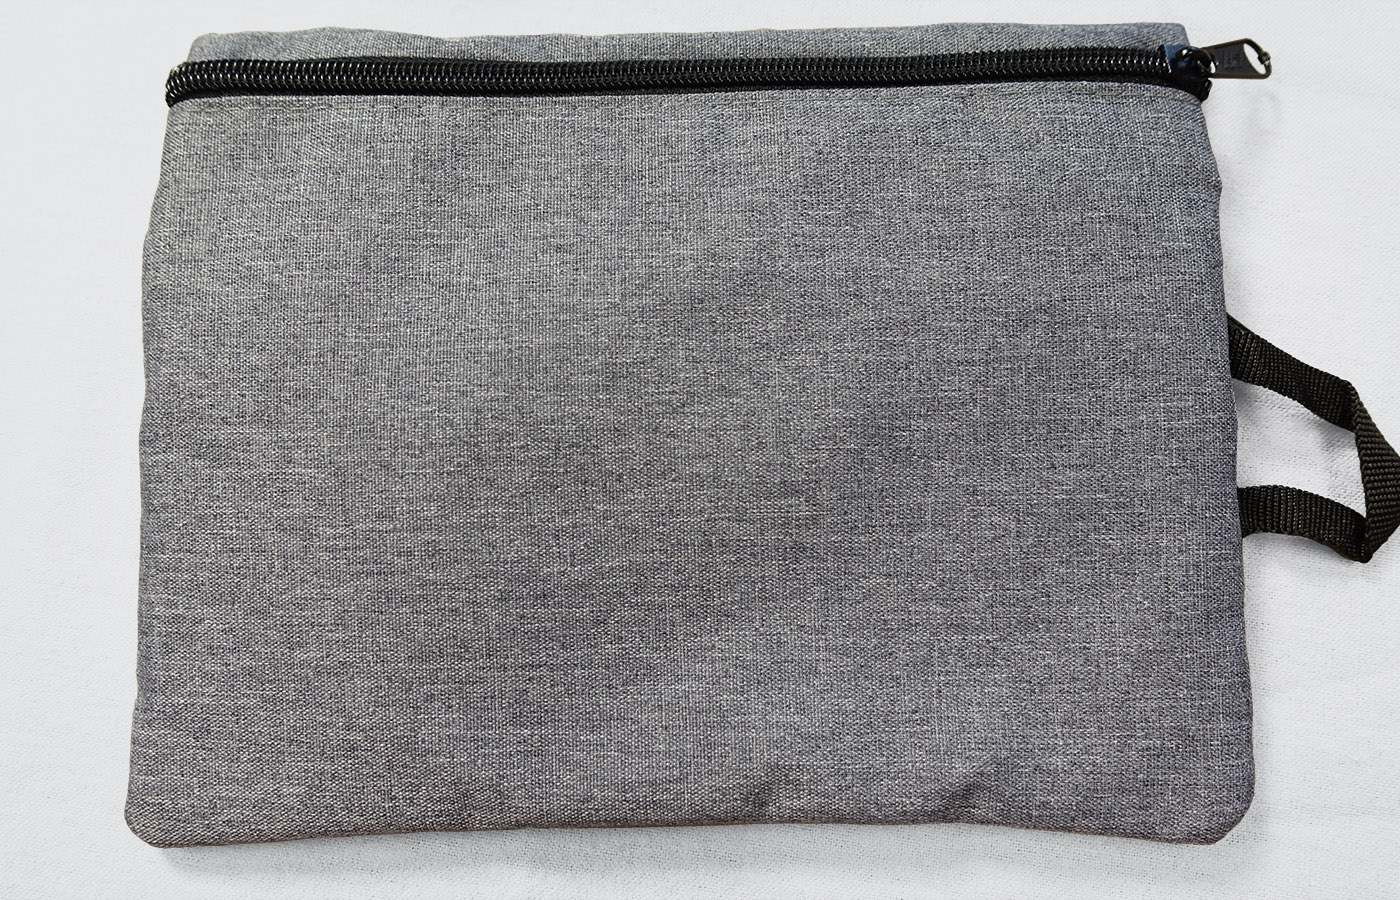 Charcoal gray accessory bag - back view